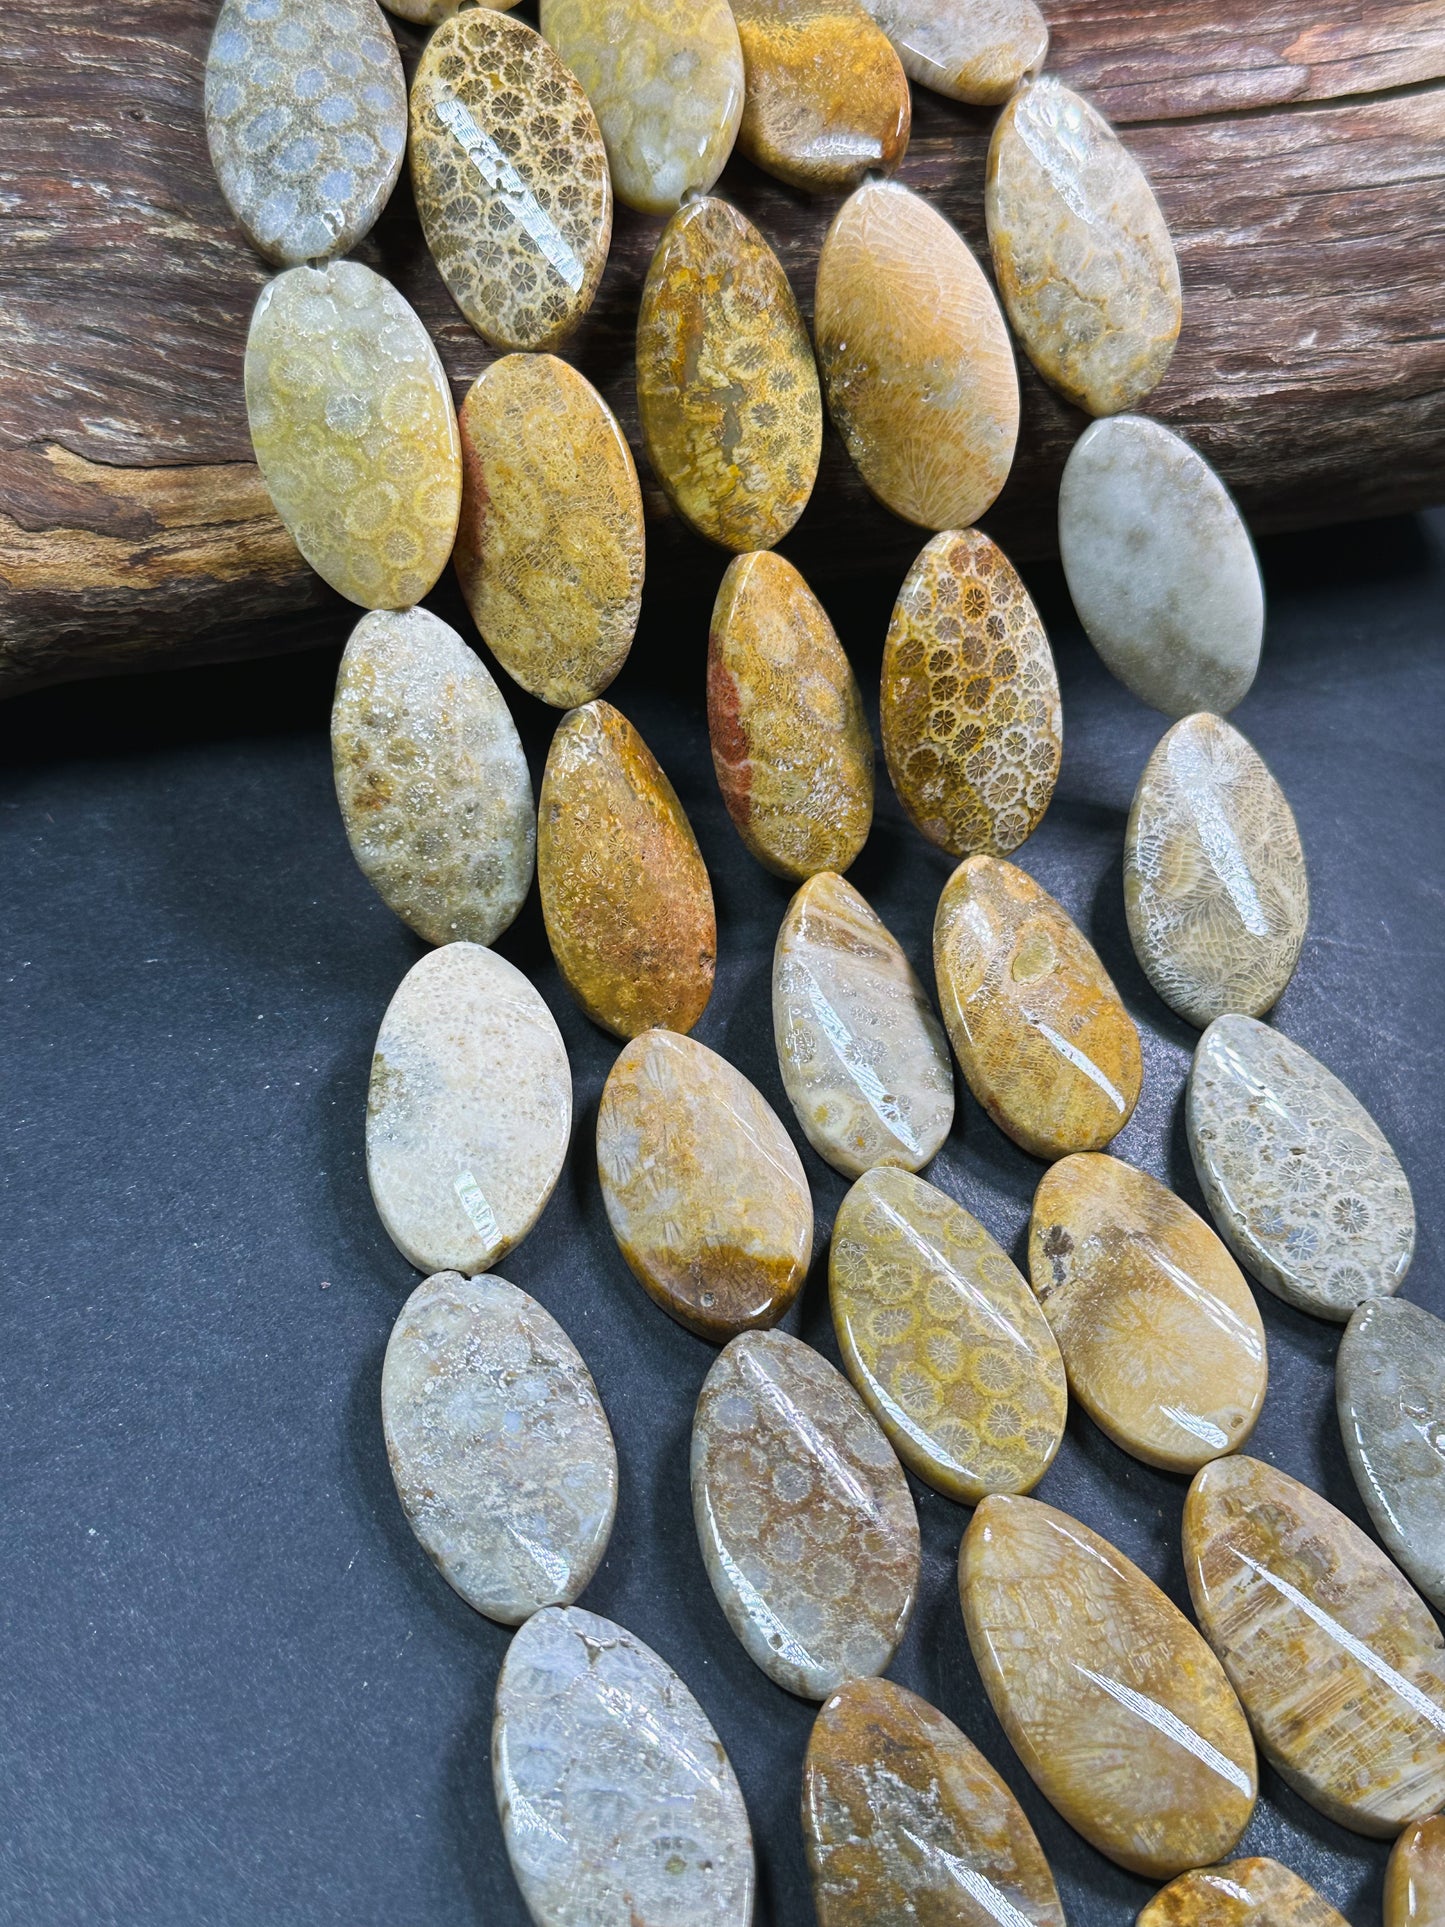 Natural Fossil Coral Gemstone Bead 35x20mm Curved Oval Shape, Beautiful Natural Beige Orange Color Fossil Coral Beads, Full Strand 15.5"